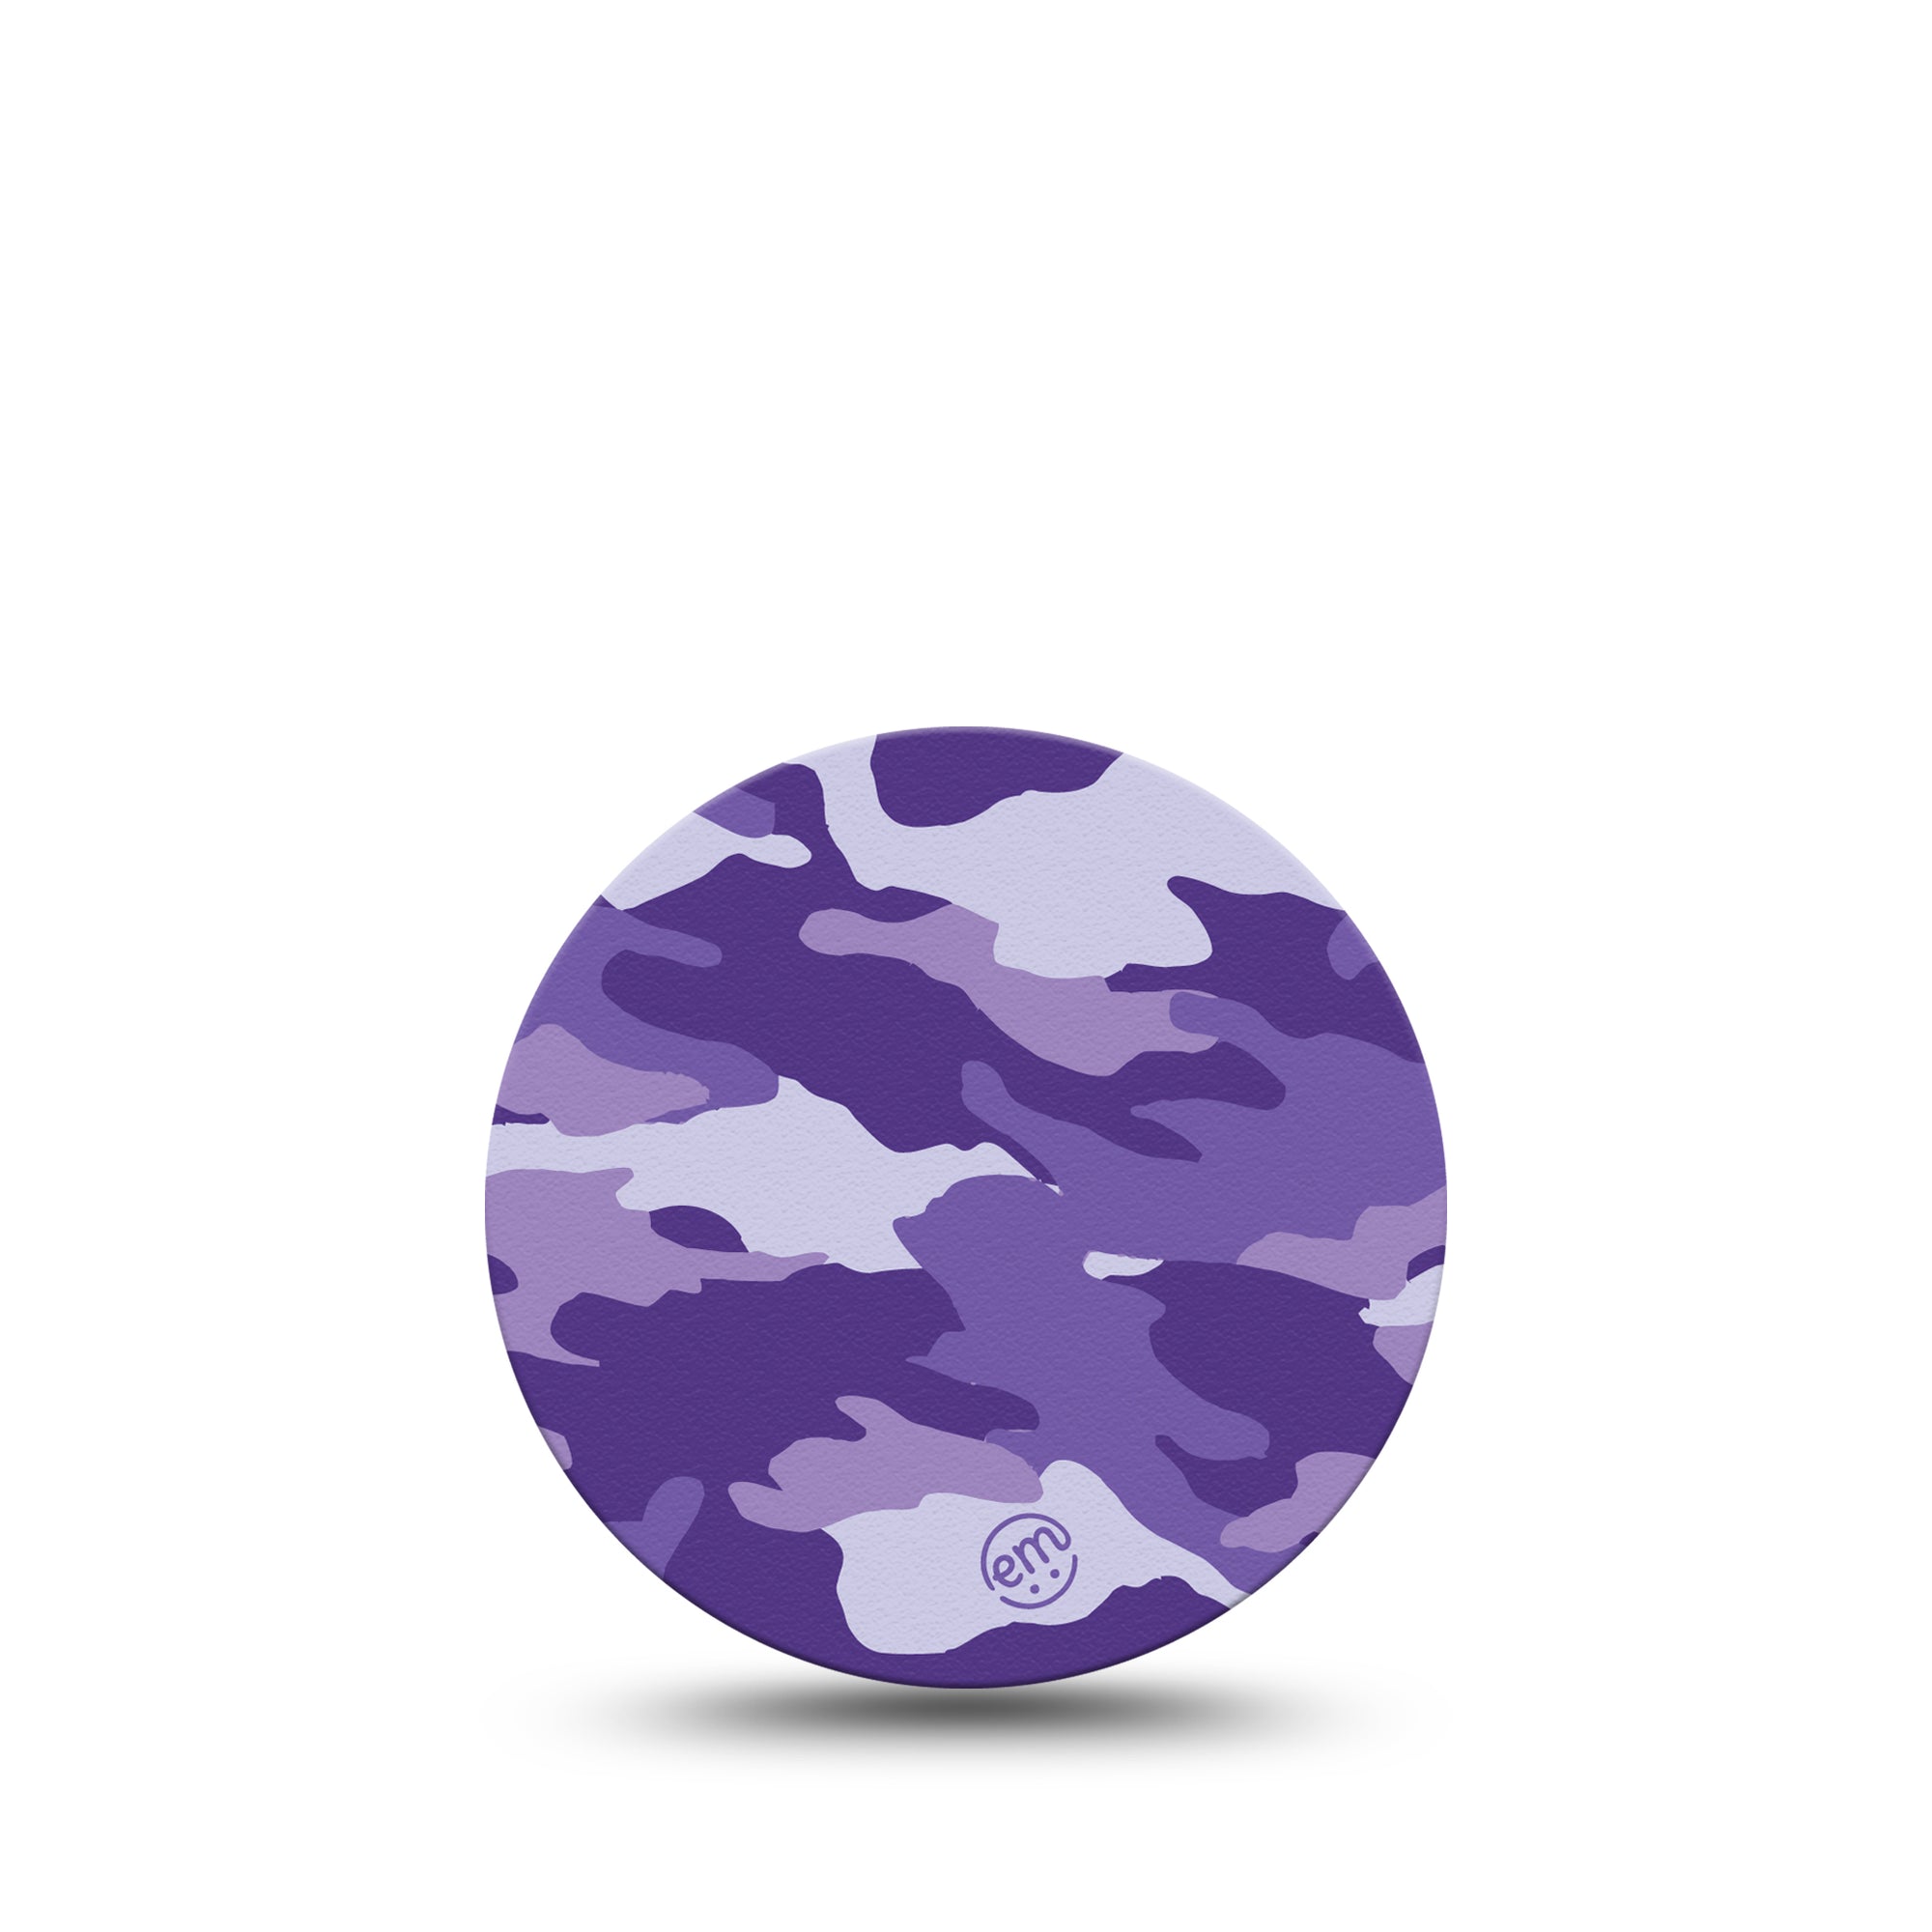 ExpressionMed Purple Camo Libre 3 Overpatch, Single, Purple Army Inspired, CGM Adhesive Tape Design